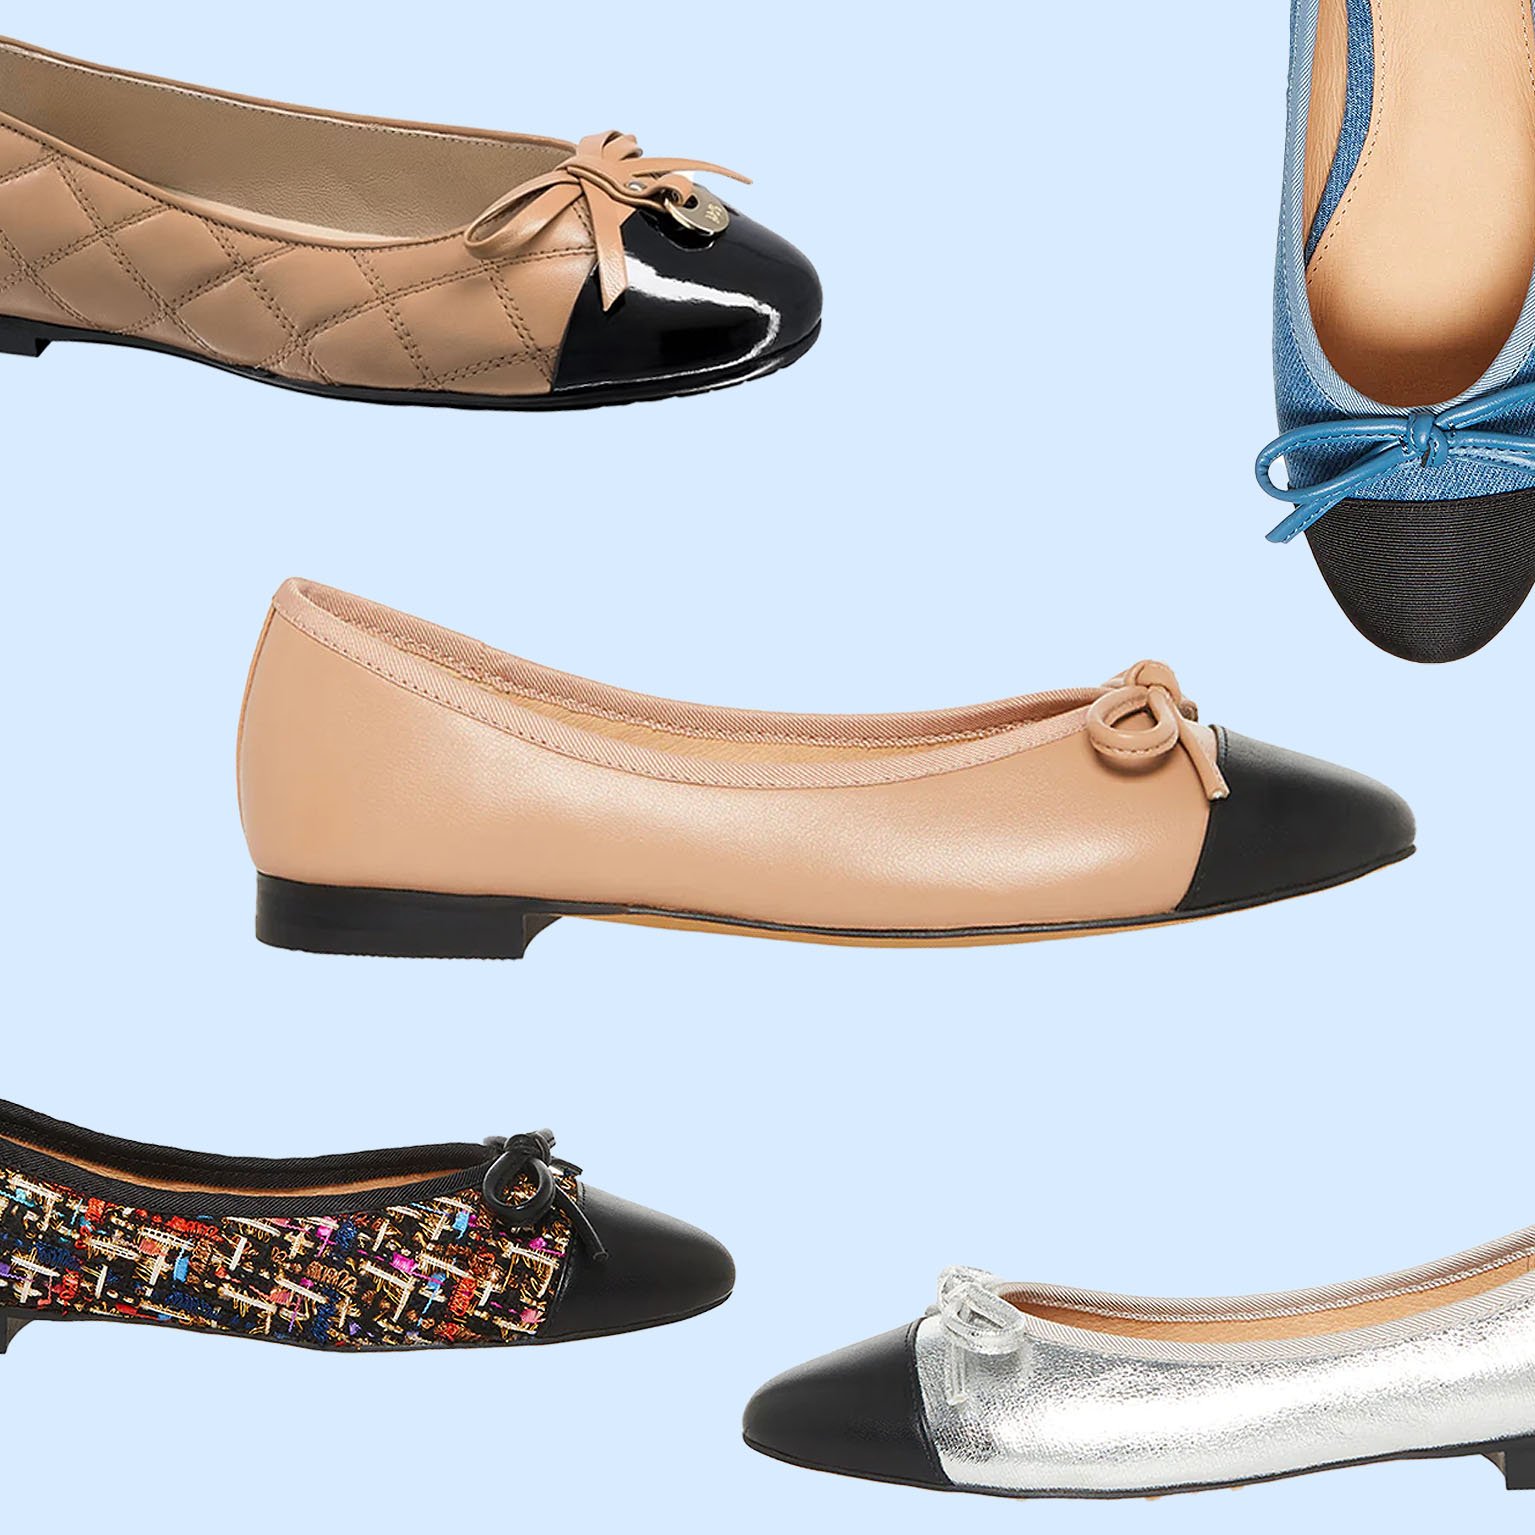 The Best Chanel Ballet Flats Dupes From $10 - TheBestDupes